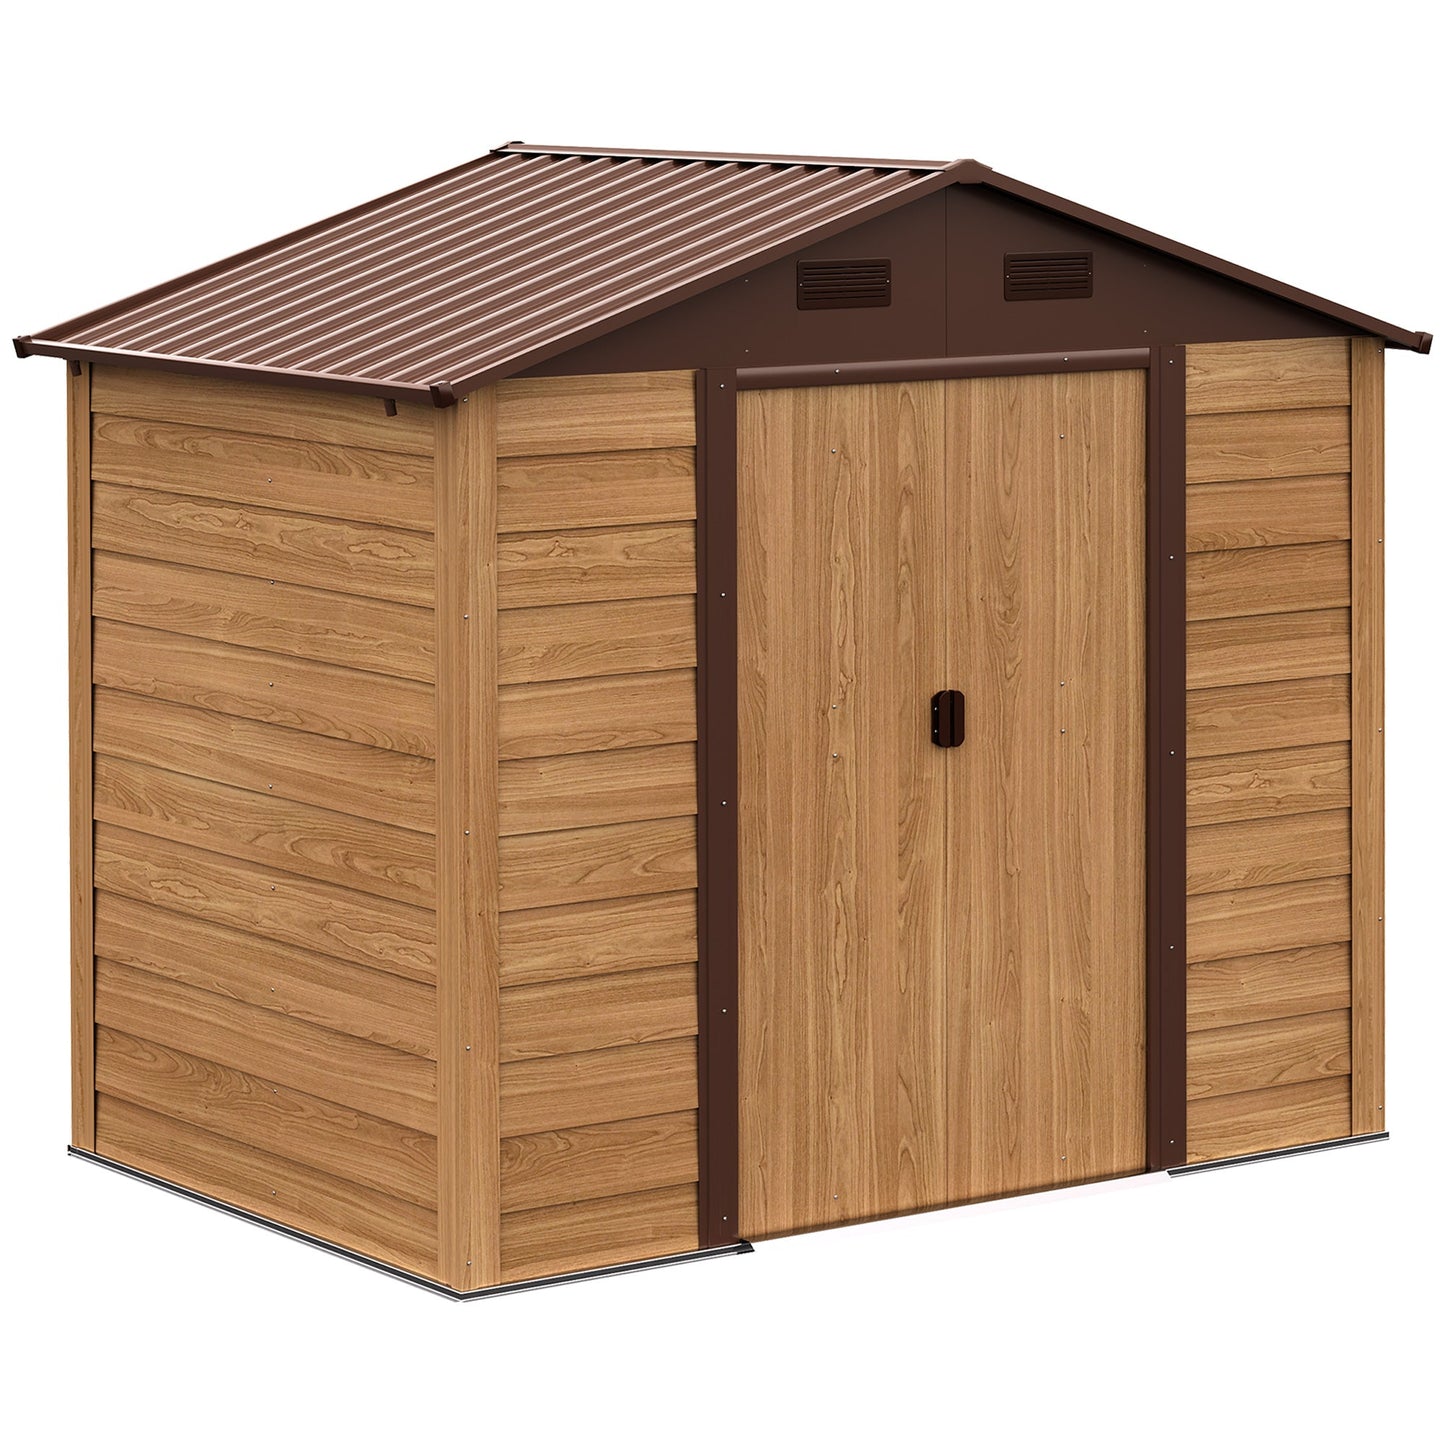 Outdoor and Garden-7.7' x 6.4' Metal Outdoor Storage Shed with 2 Doors and 4 Ventilation for Patio, Backyard & Lawn, Outdoor Furniture, Brown - Outdoor Style Company